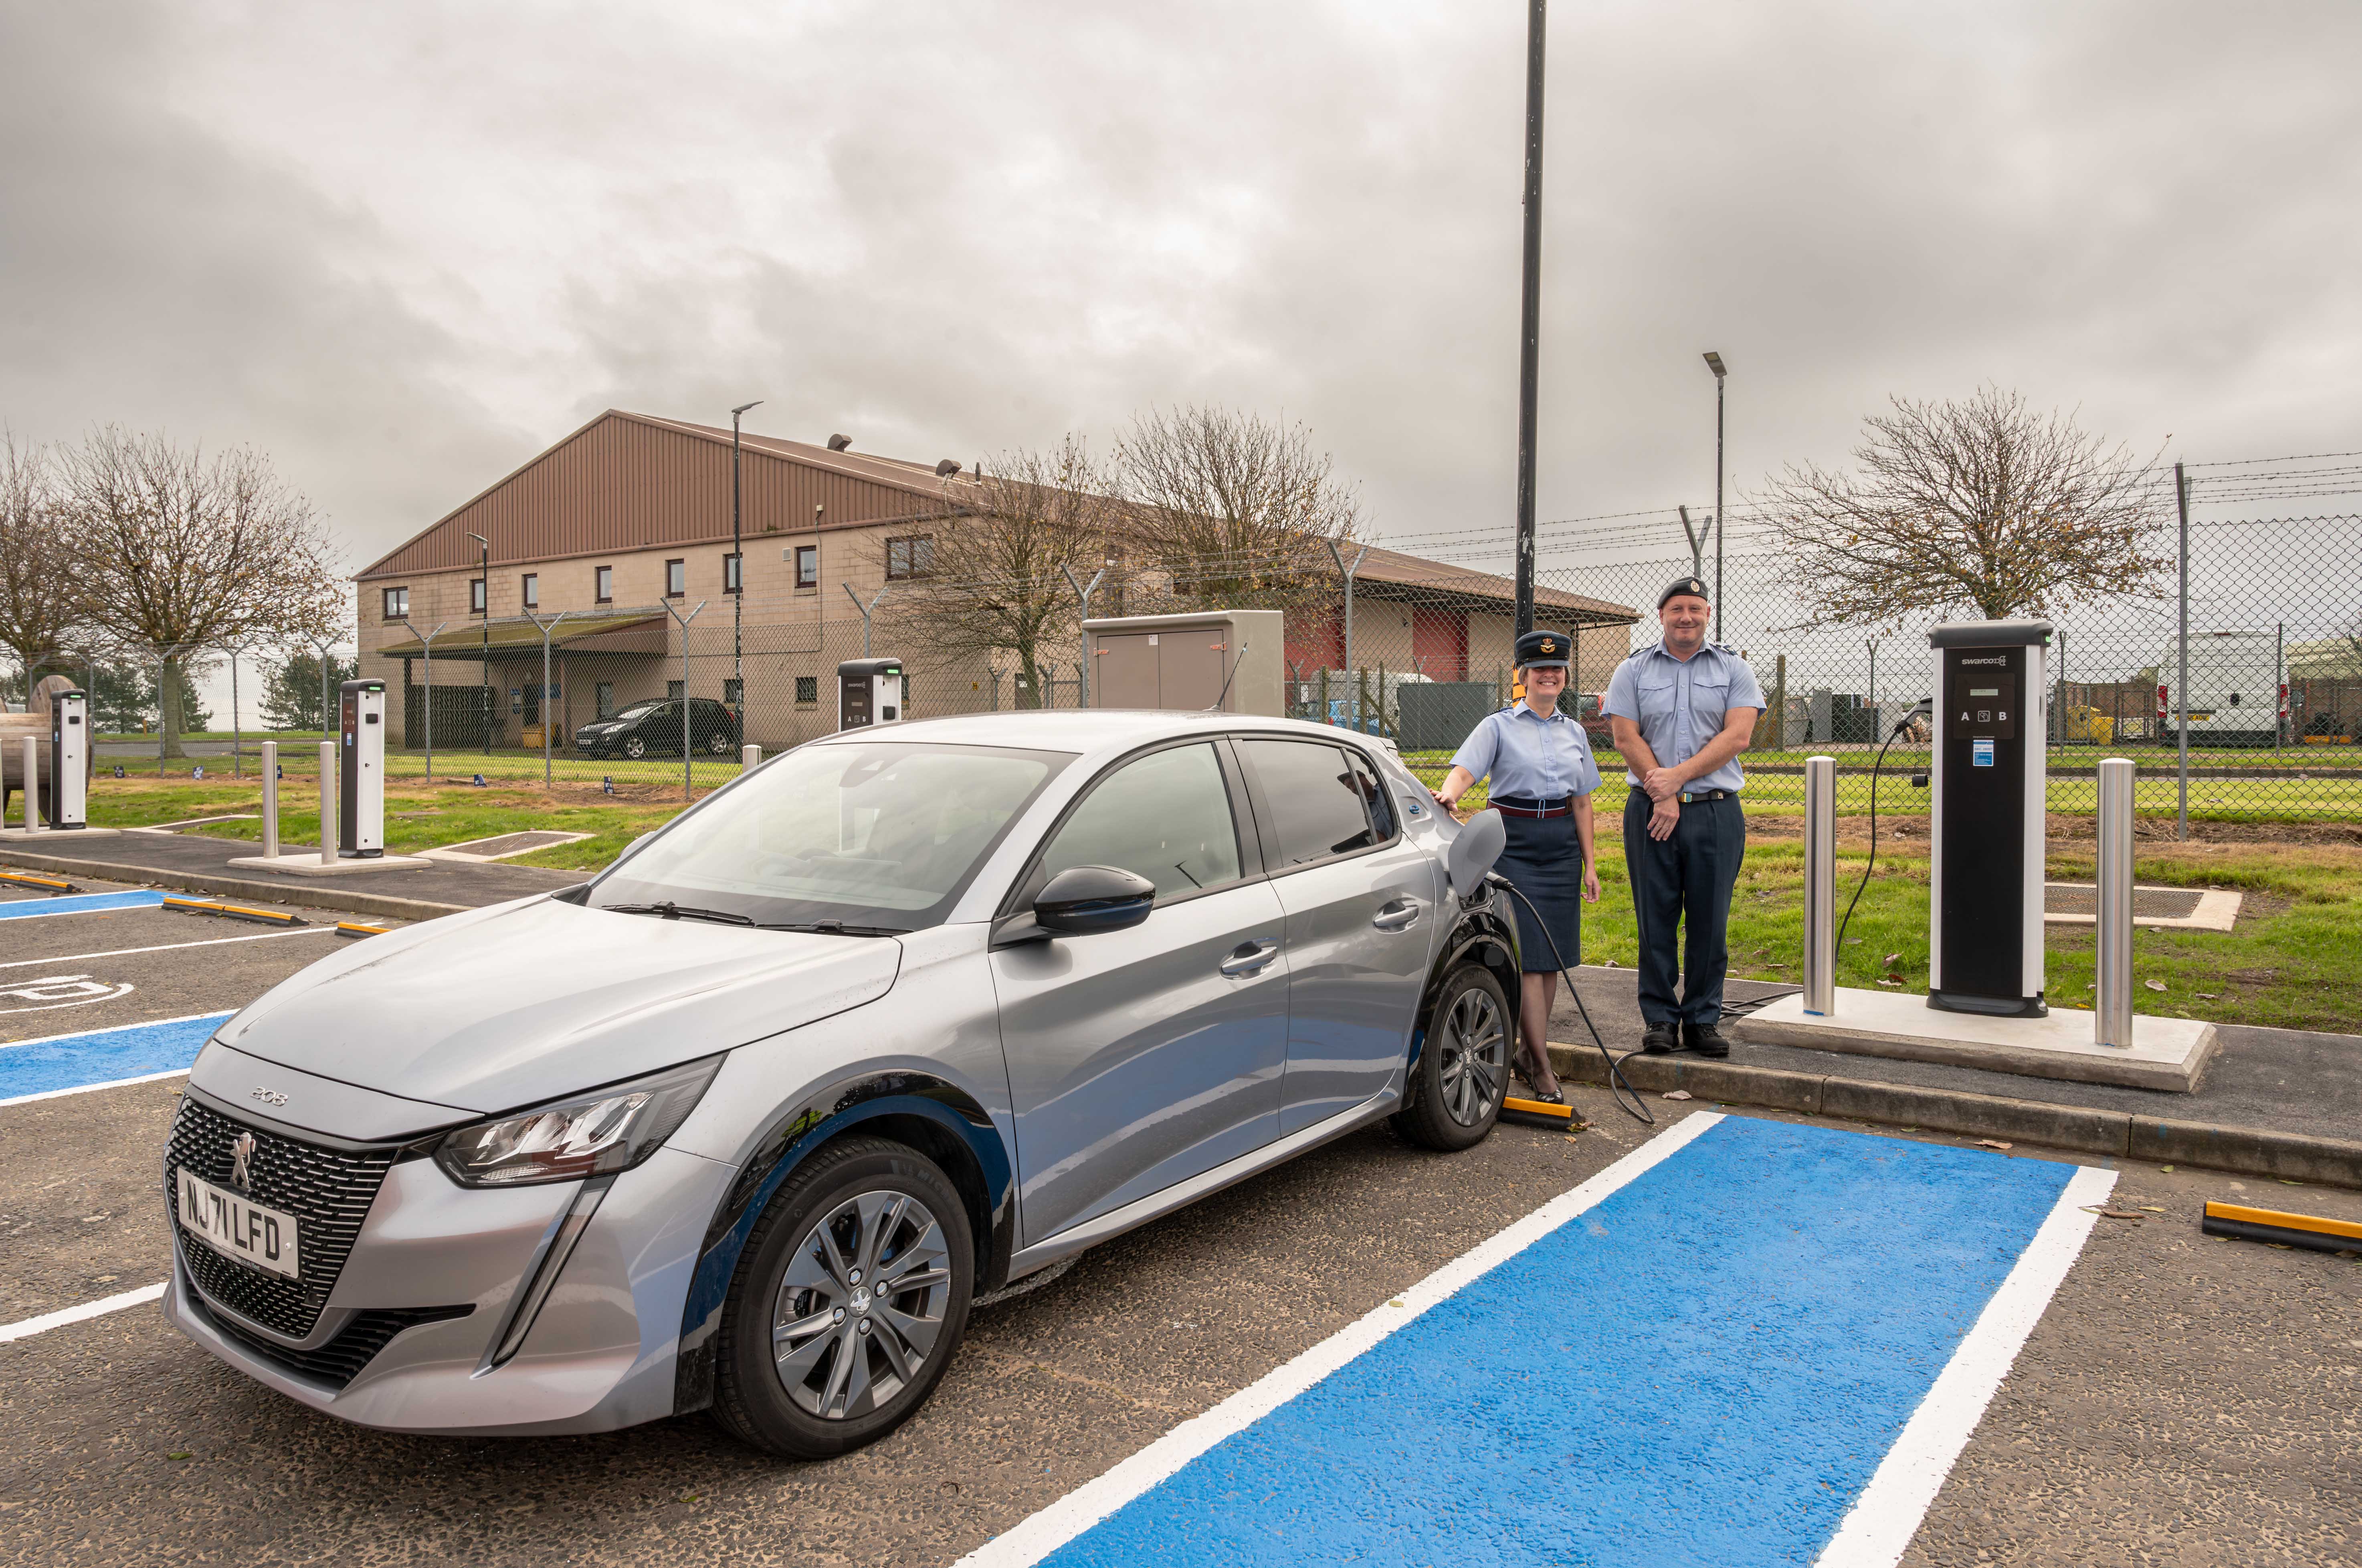 RAF Boulmer hosted an opening ceremony for one of the Station’s Electrical Vehicle (EV) Charging Points